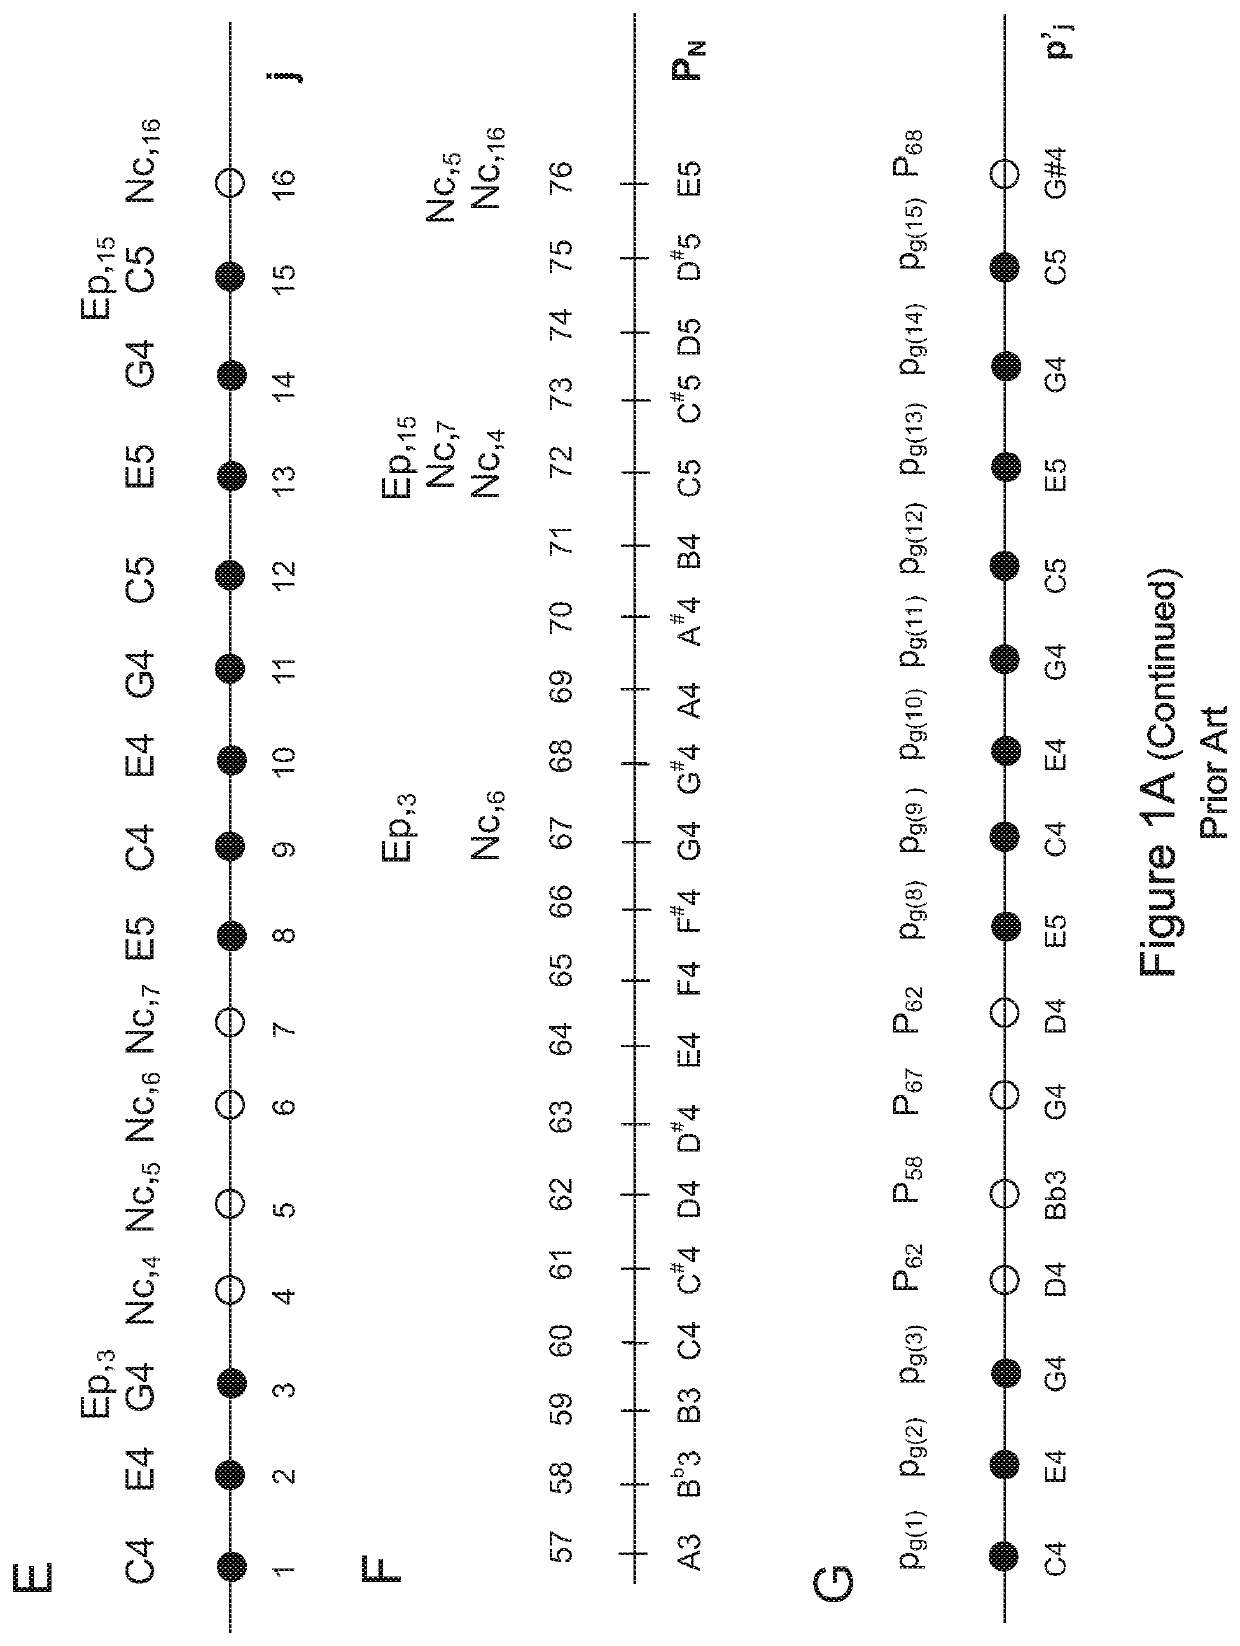 Method and apparatus for computer-aided mash-up variations of music and other sequences, including mash-up variation by chaotic mapping